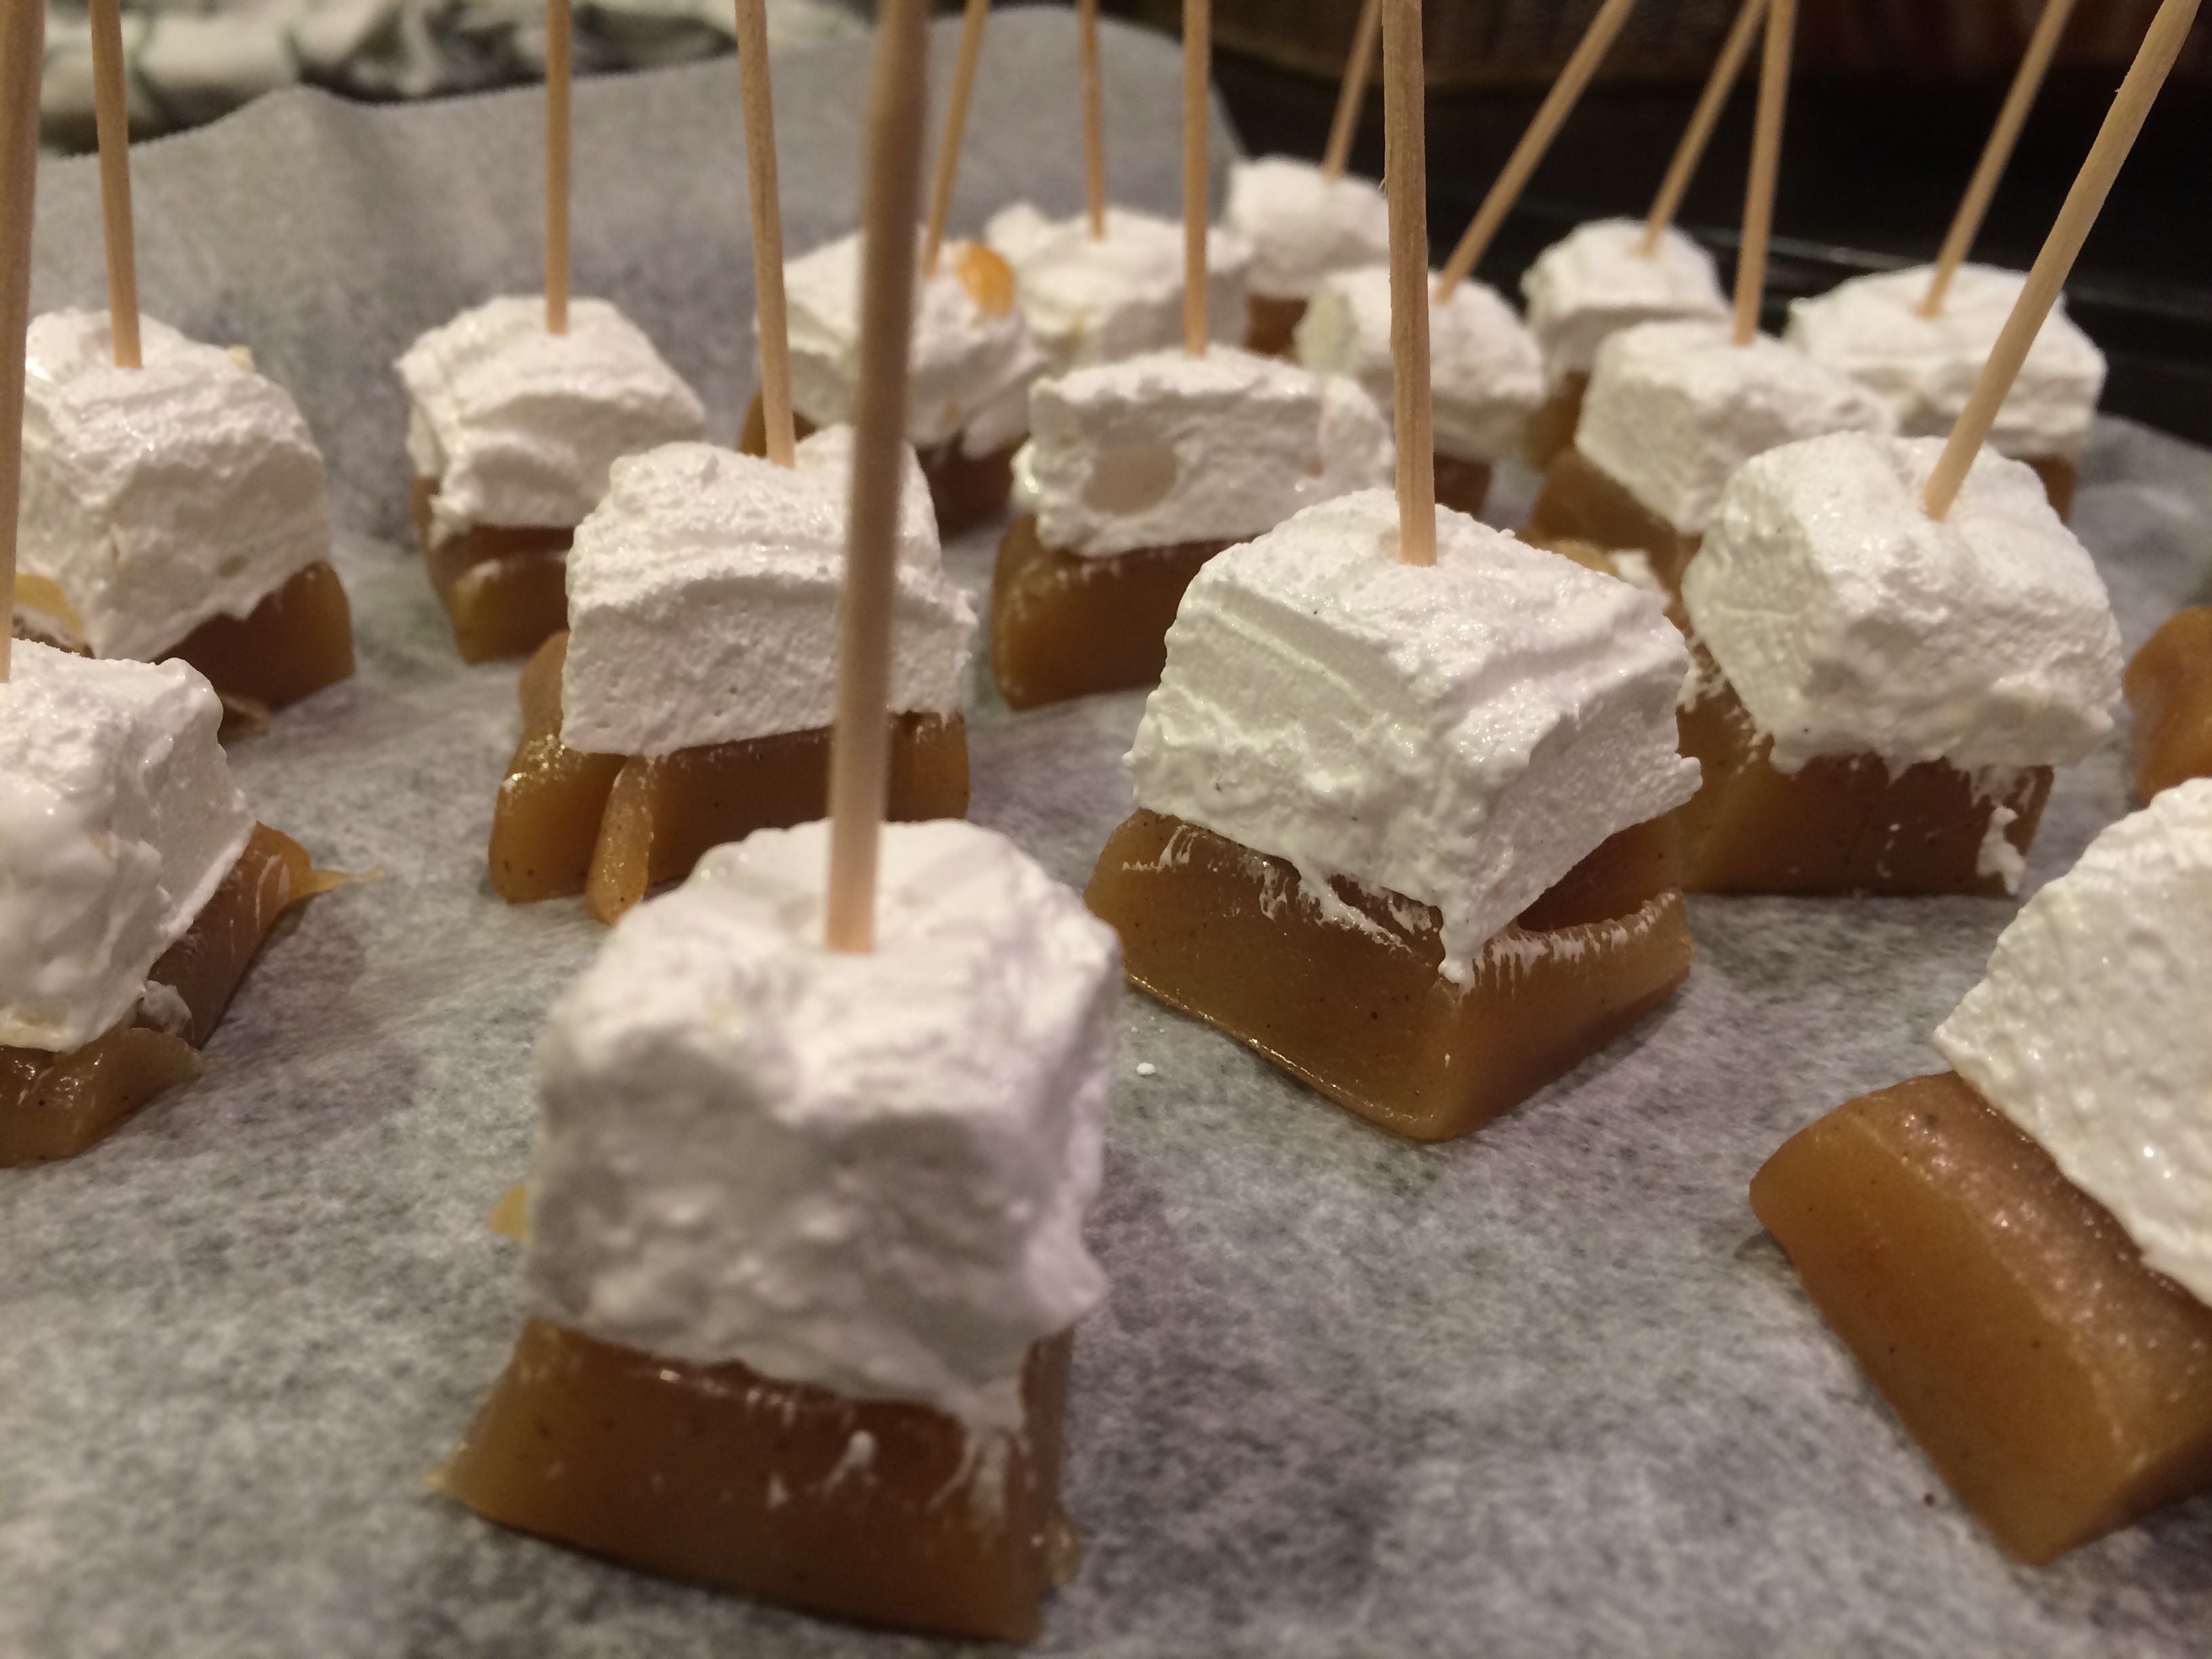 Scotch Mallows ready for chocolate